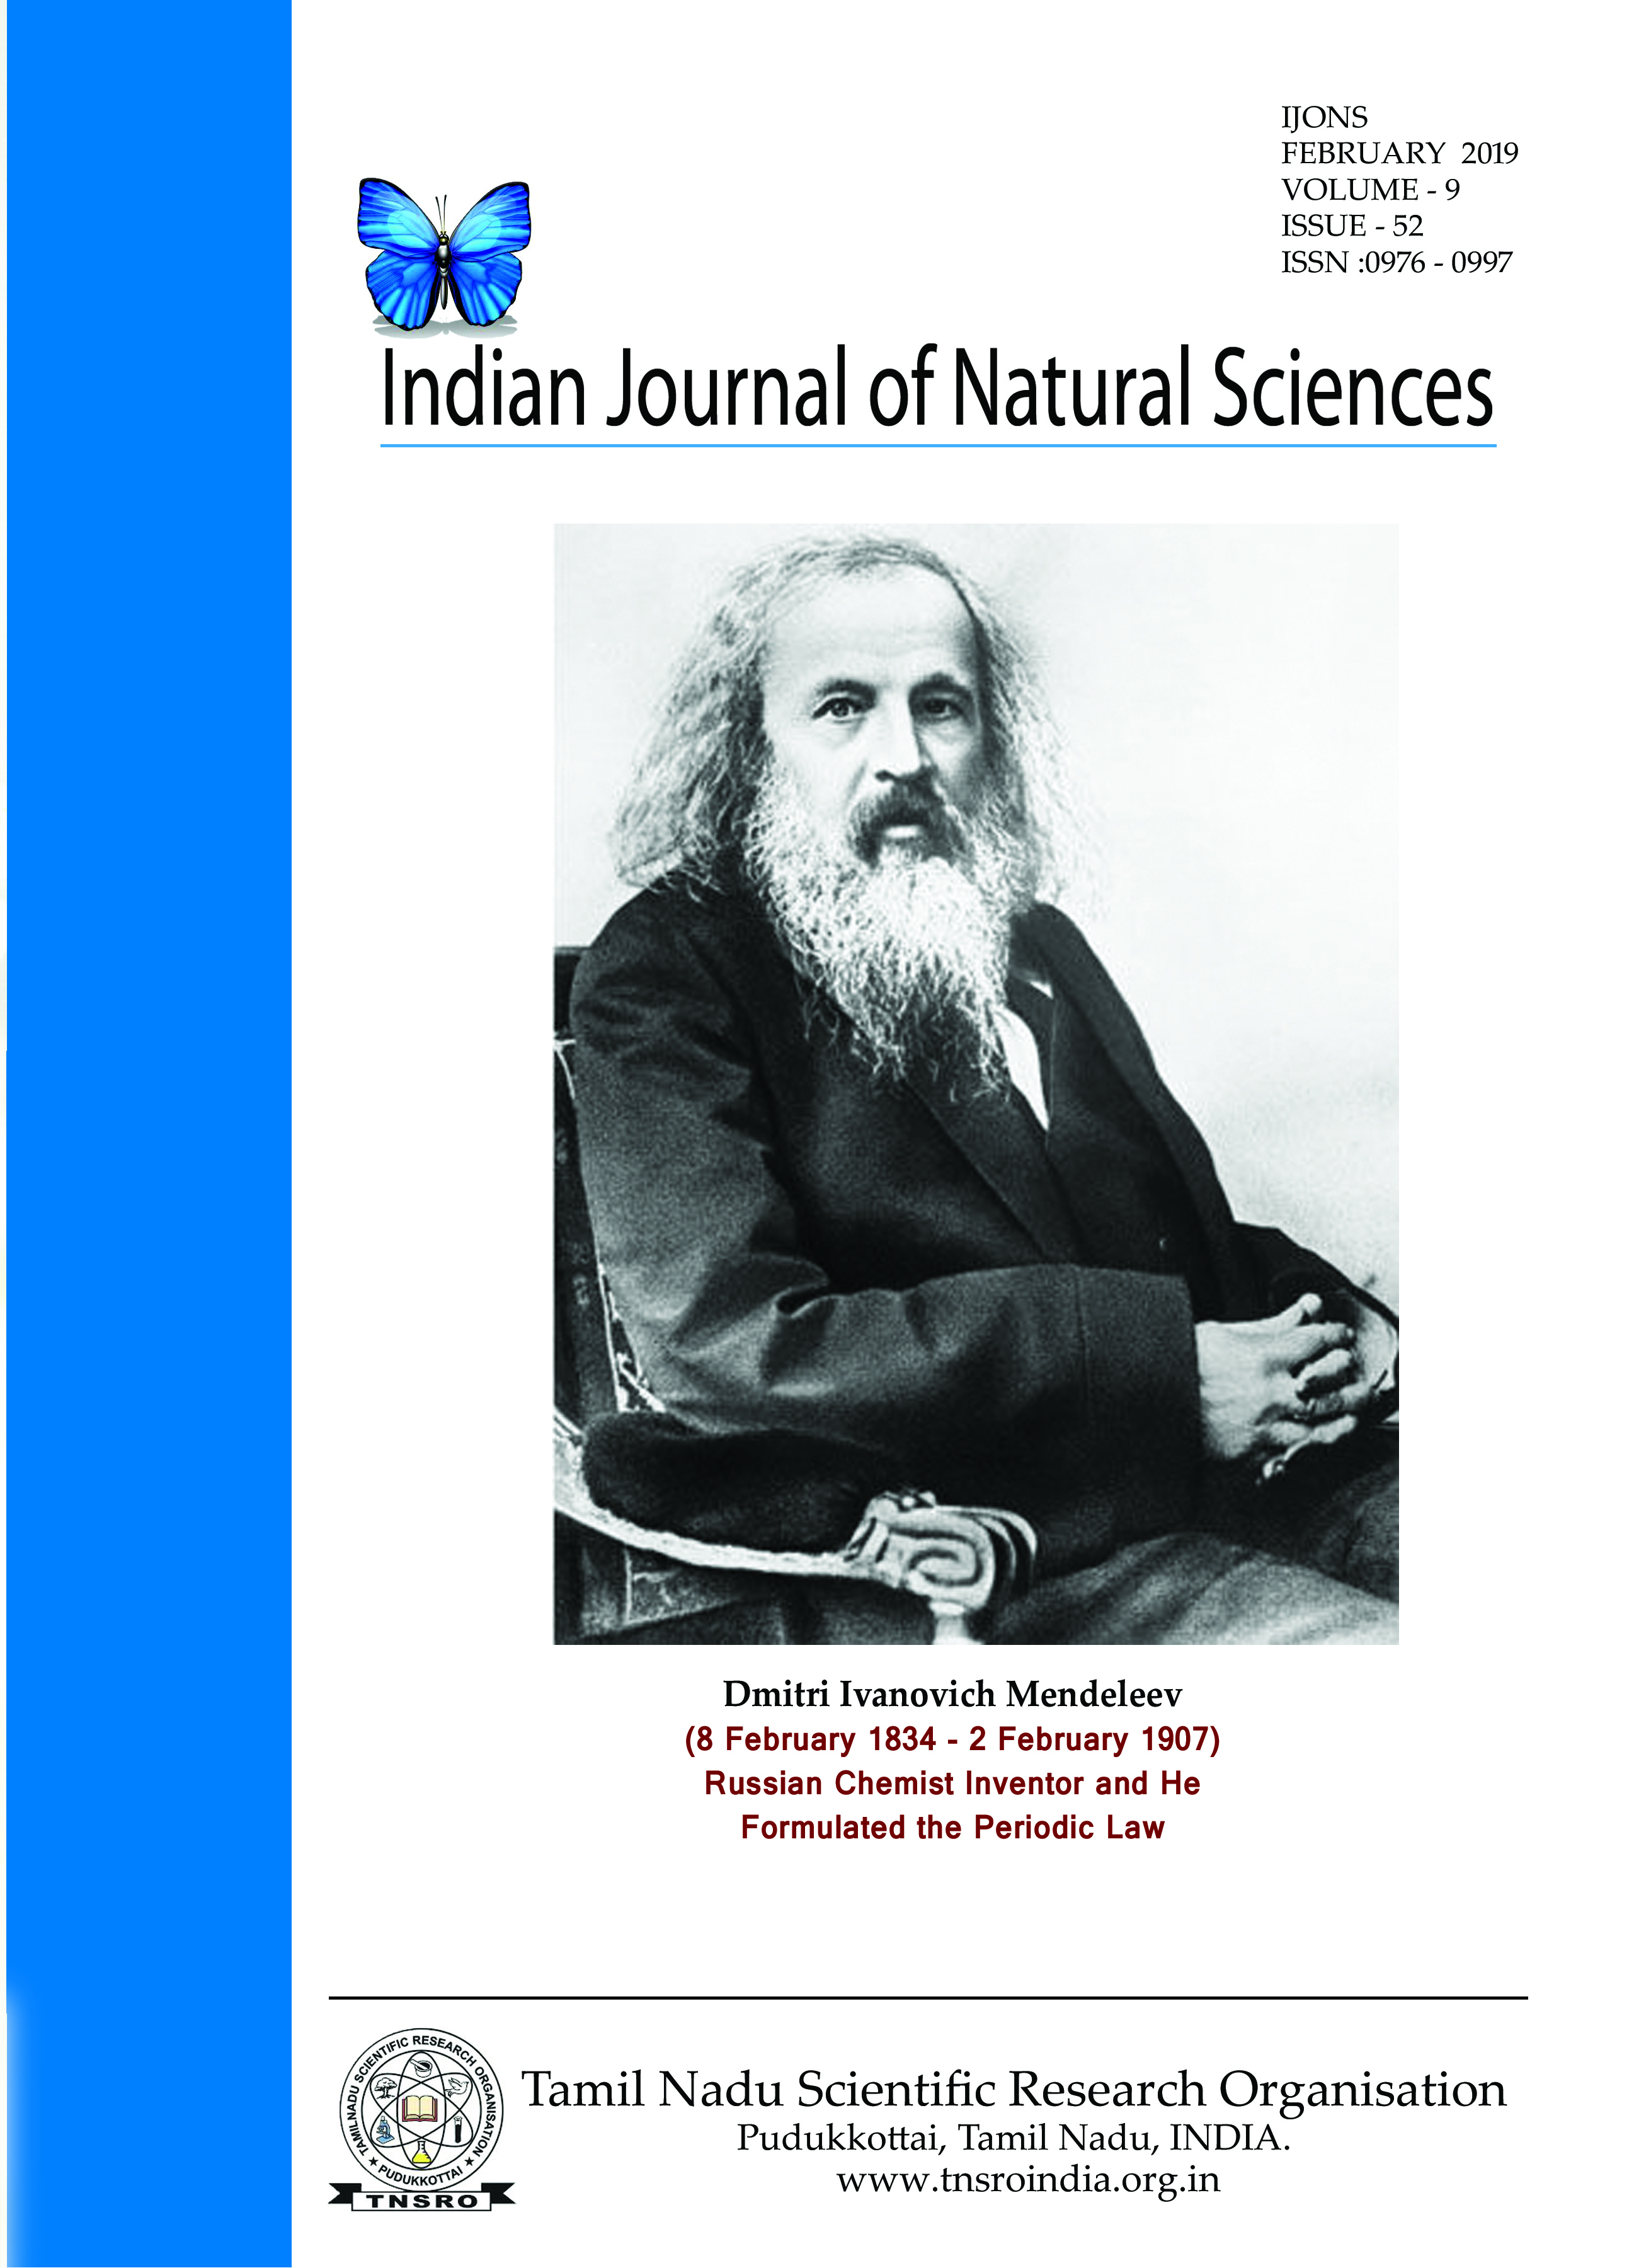 INDIAN JOURNAL OF NATURAL SCIENCES